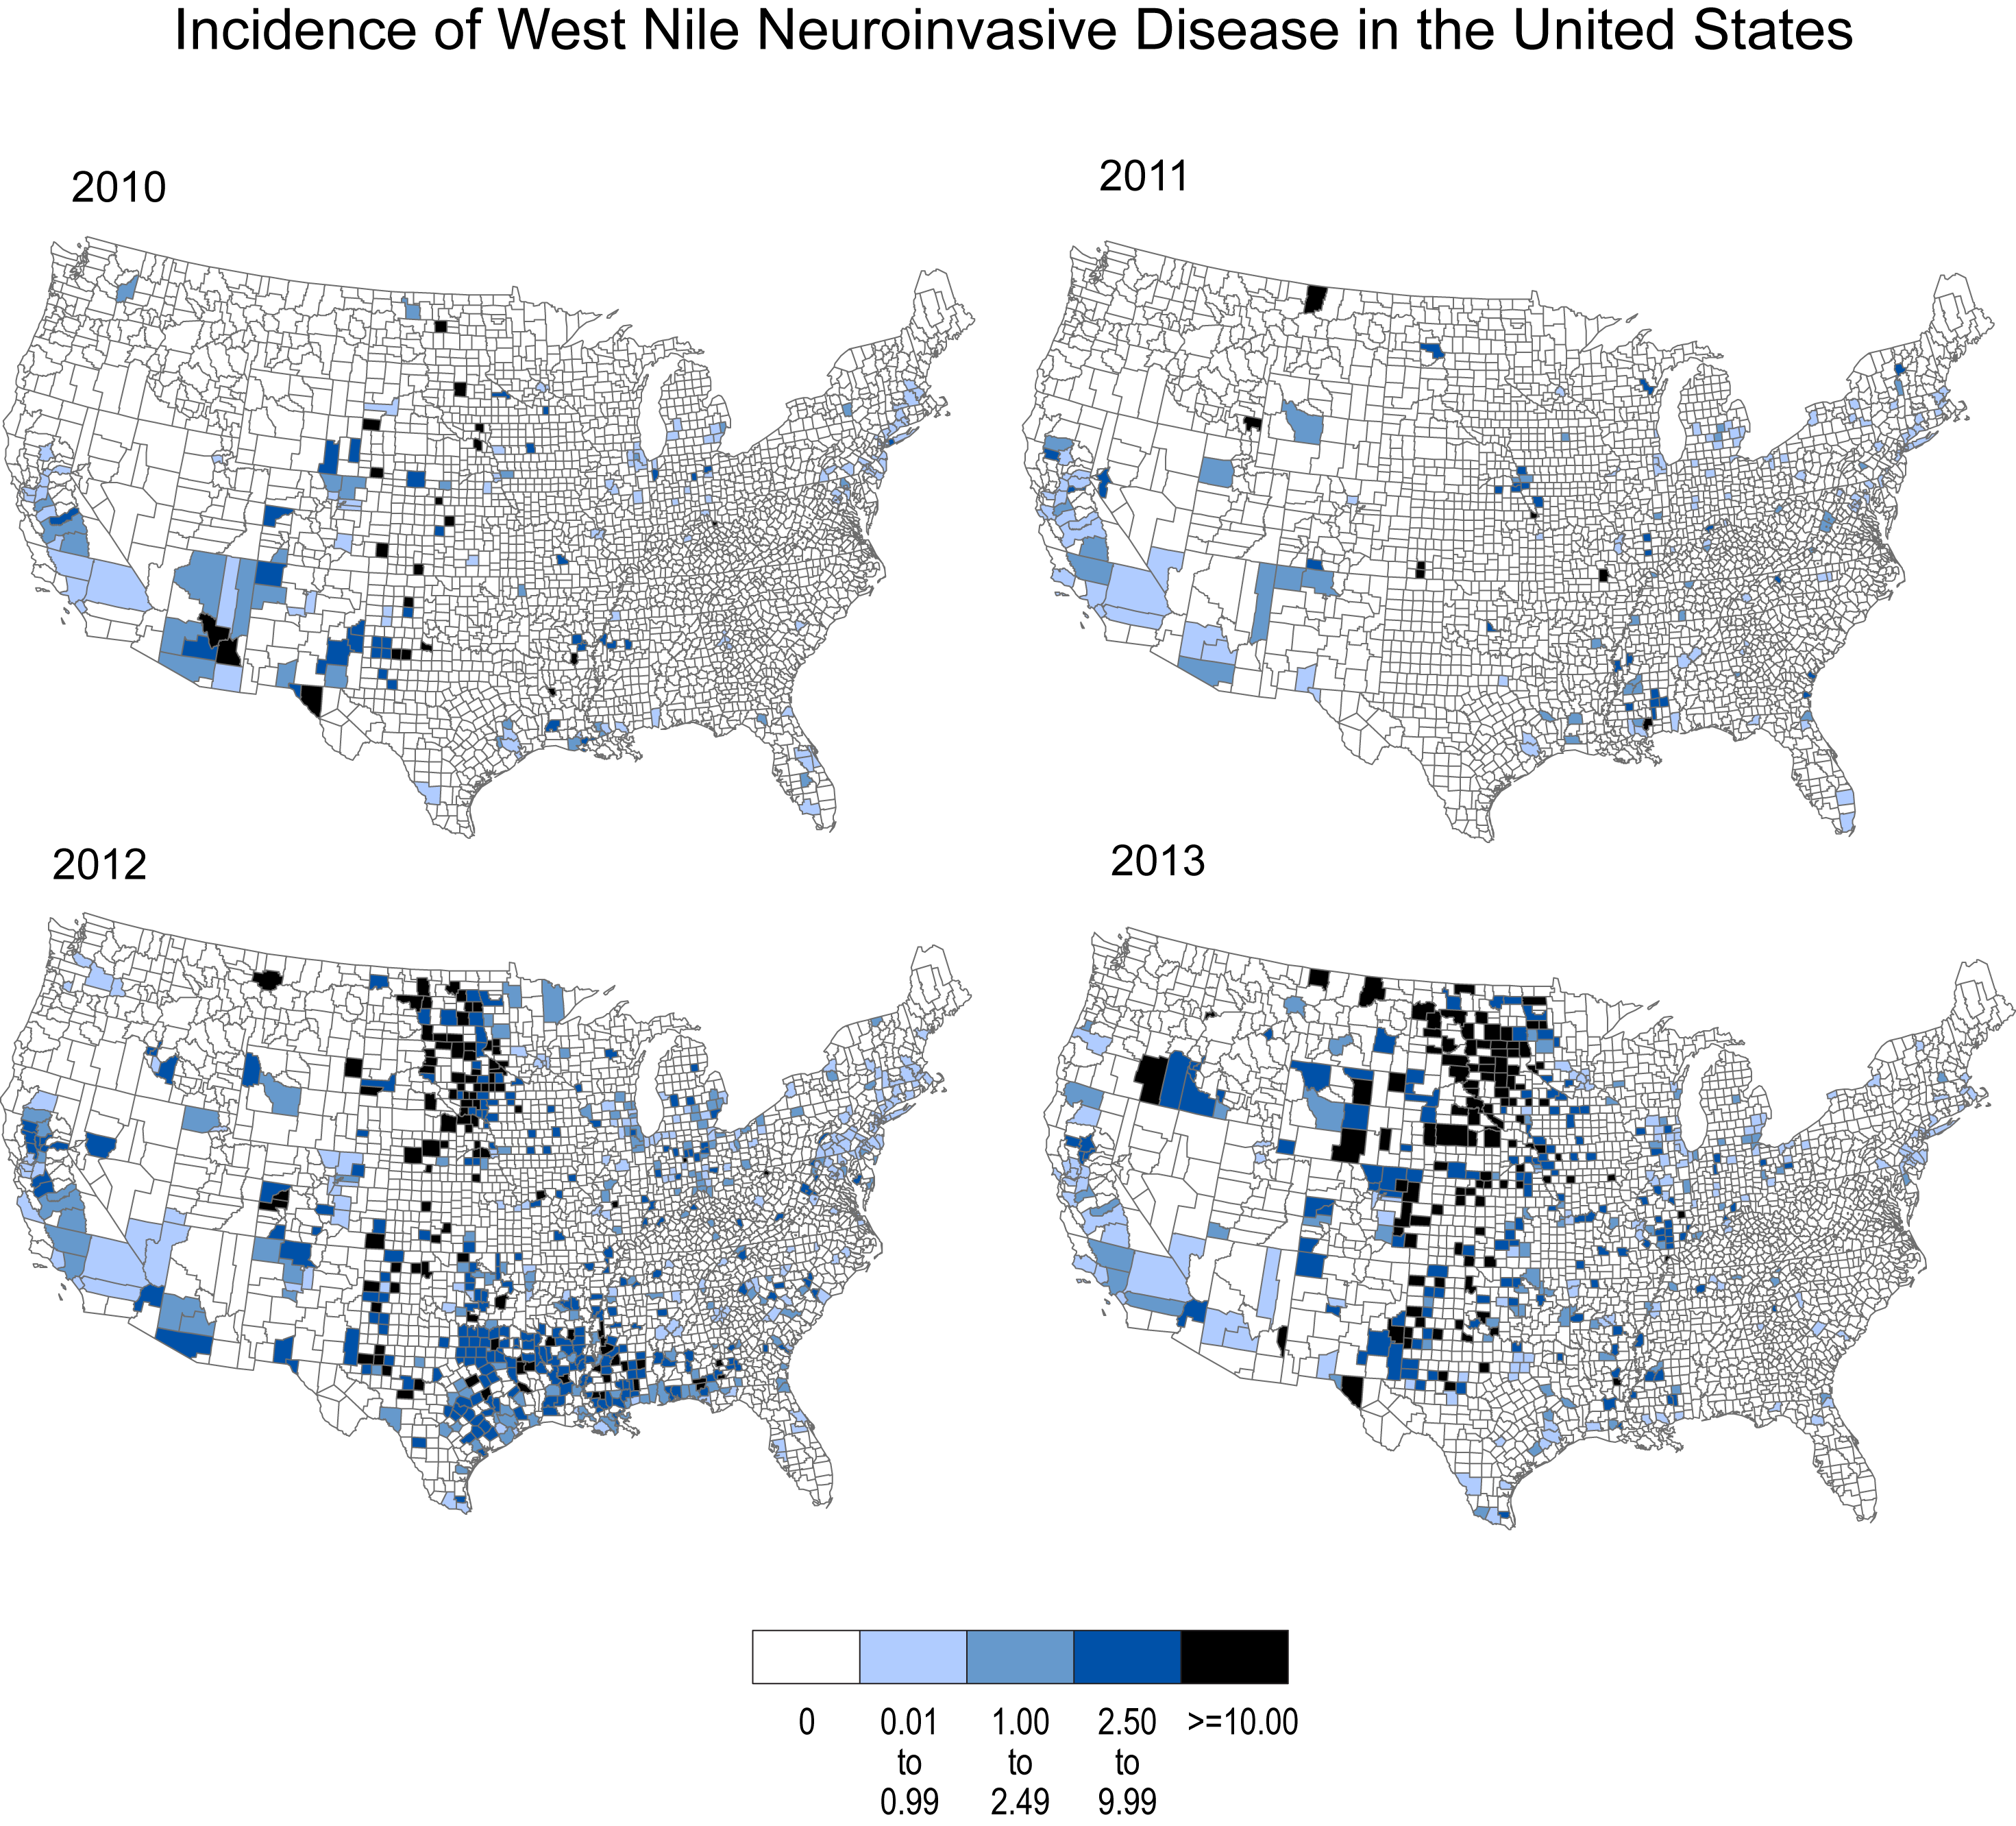 Incidence of West Nile Neuroinvasive Disease by County in the United States